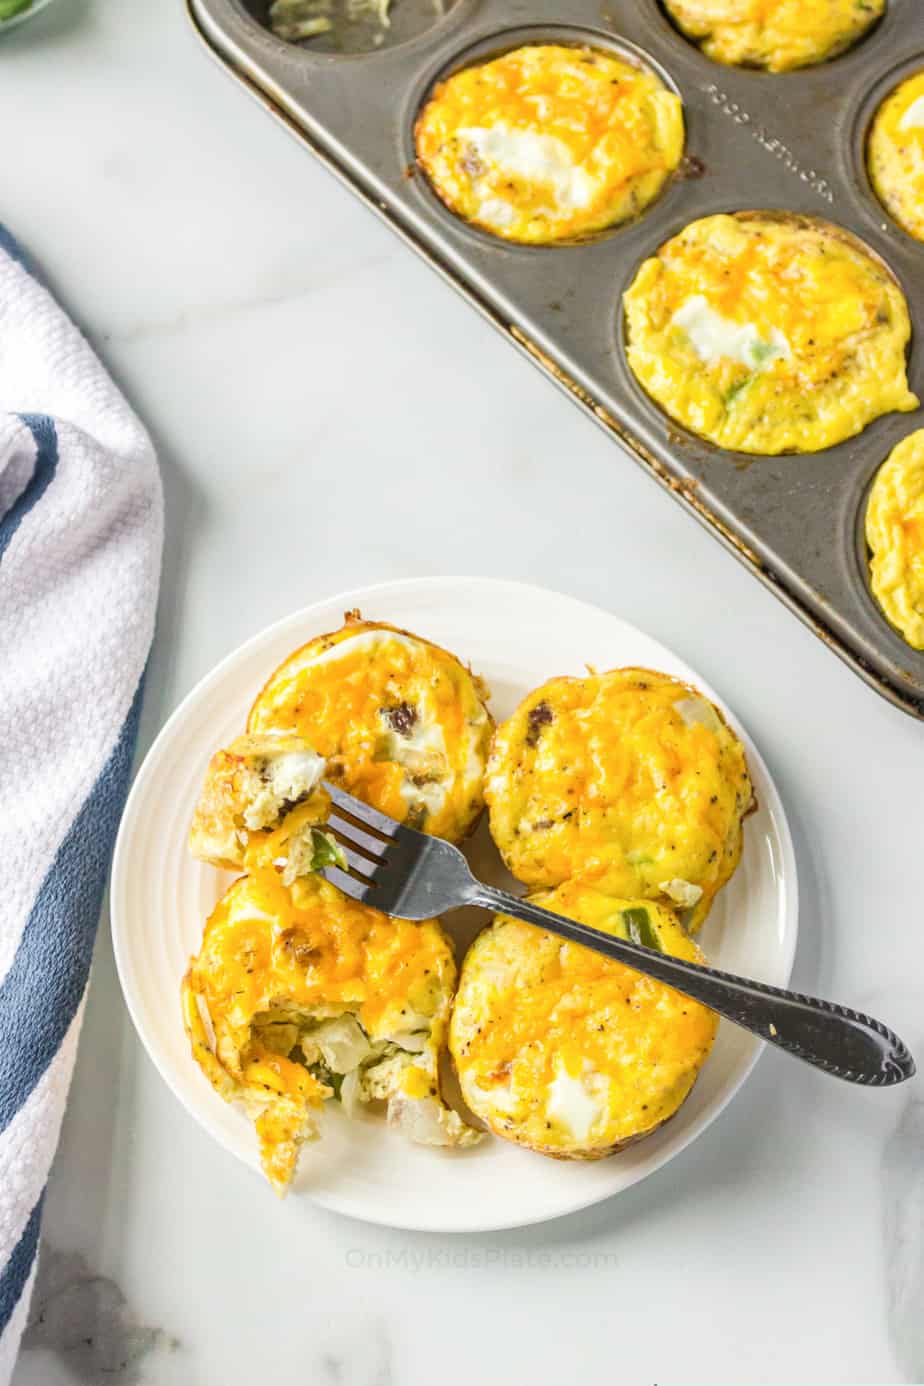 Egg bites on a plate with a fork, a muffin pan with baked omelets insider to the side.